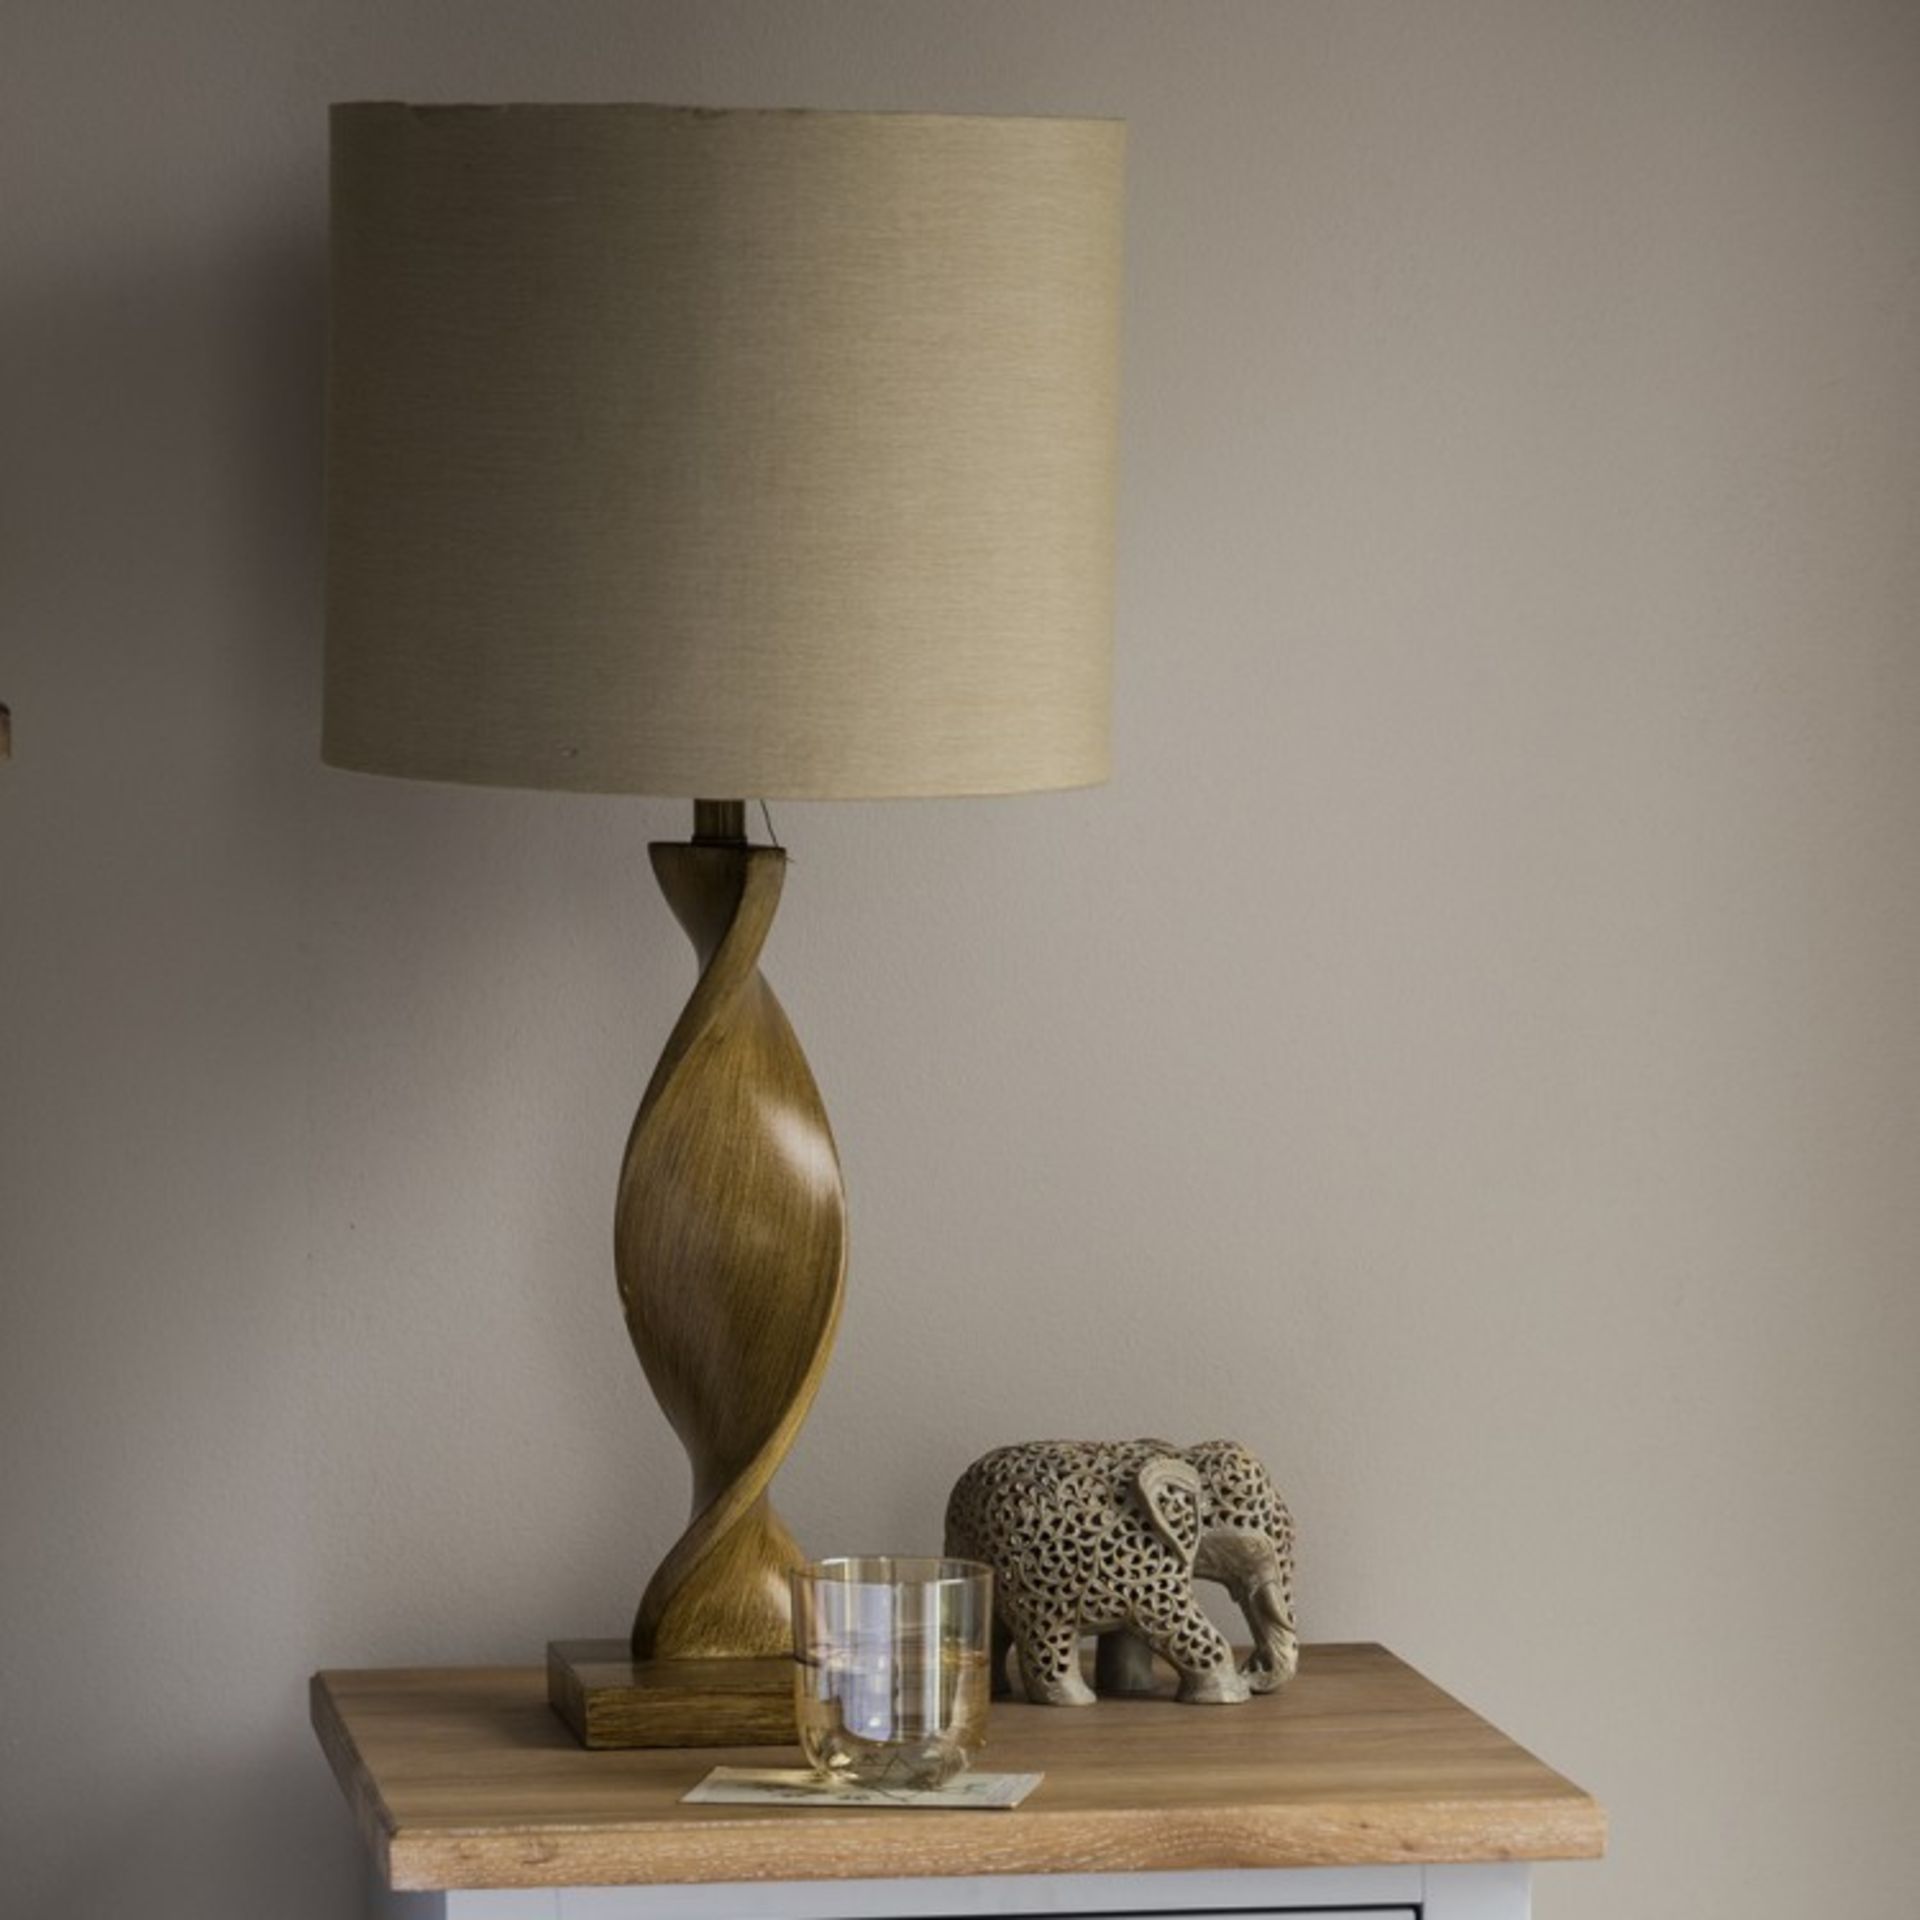 Argenta Table Lamp Sleek spiral table lamp in a neutral, light wood finish with a fabric shade.